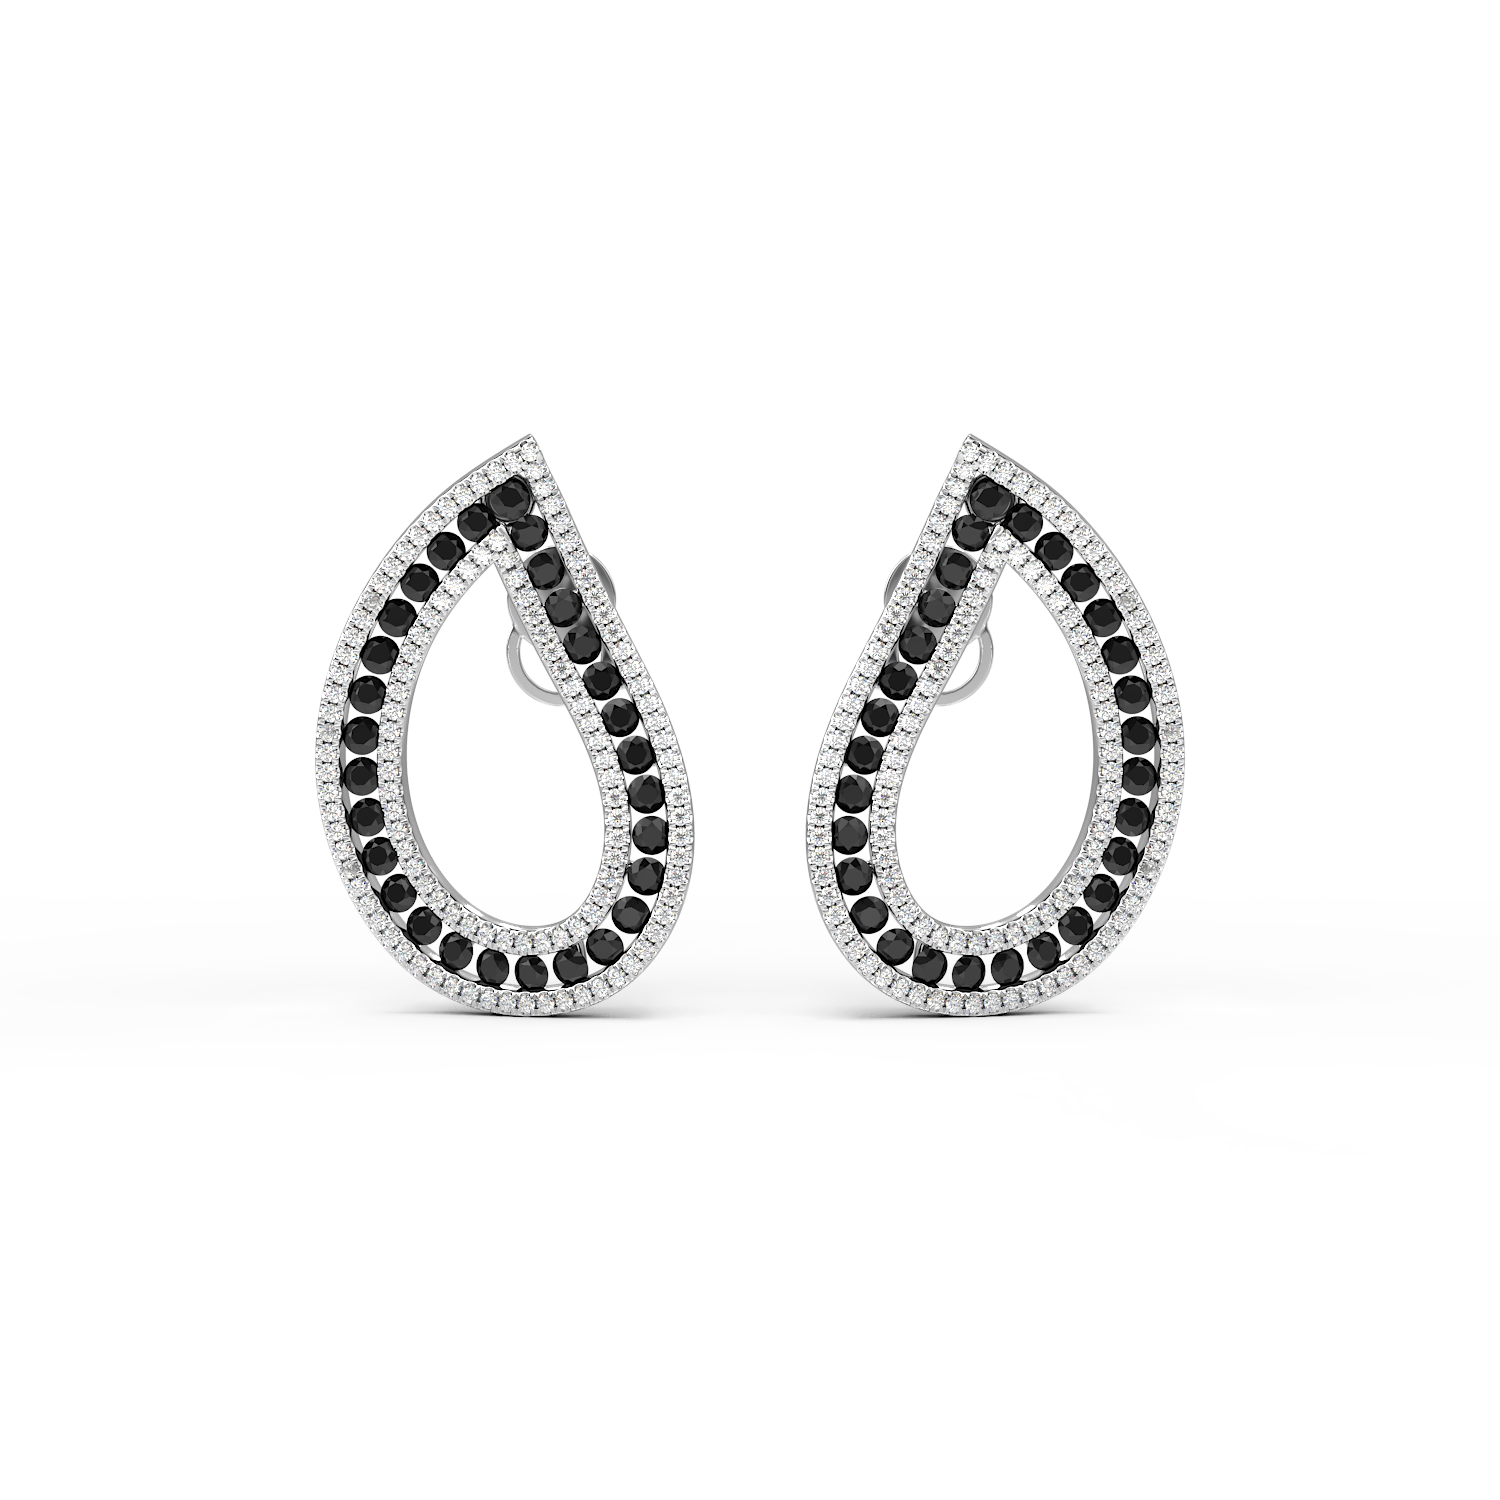 White gold earrings with 1.82ct black diamonds and 0.62ct clear diamonds